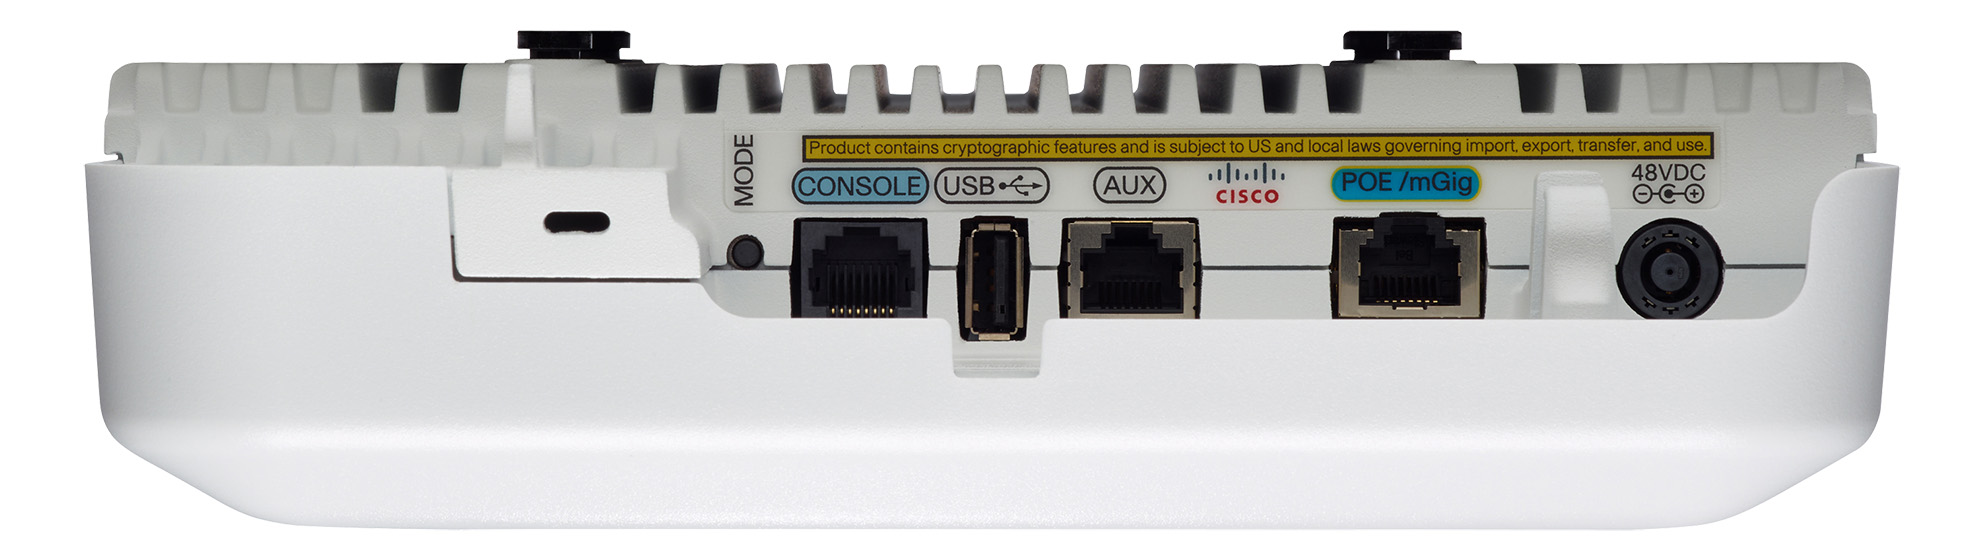 AIR-AP2802I-B-K9 console port and ethernet port